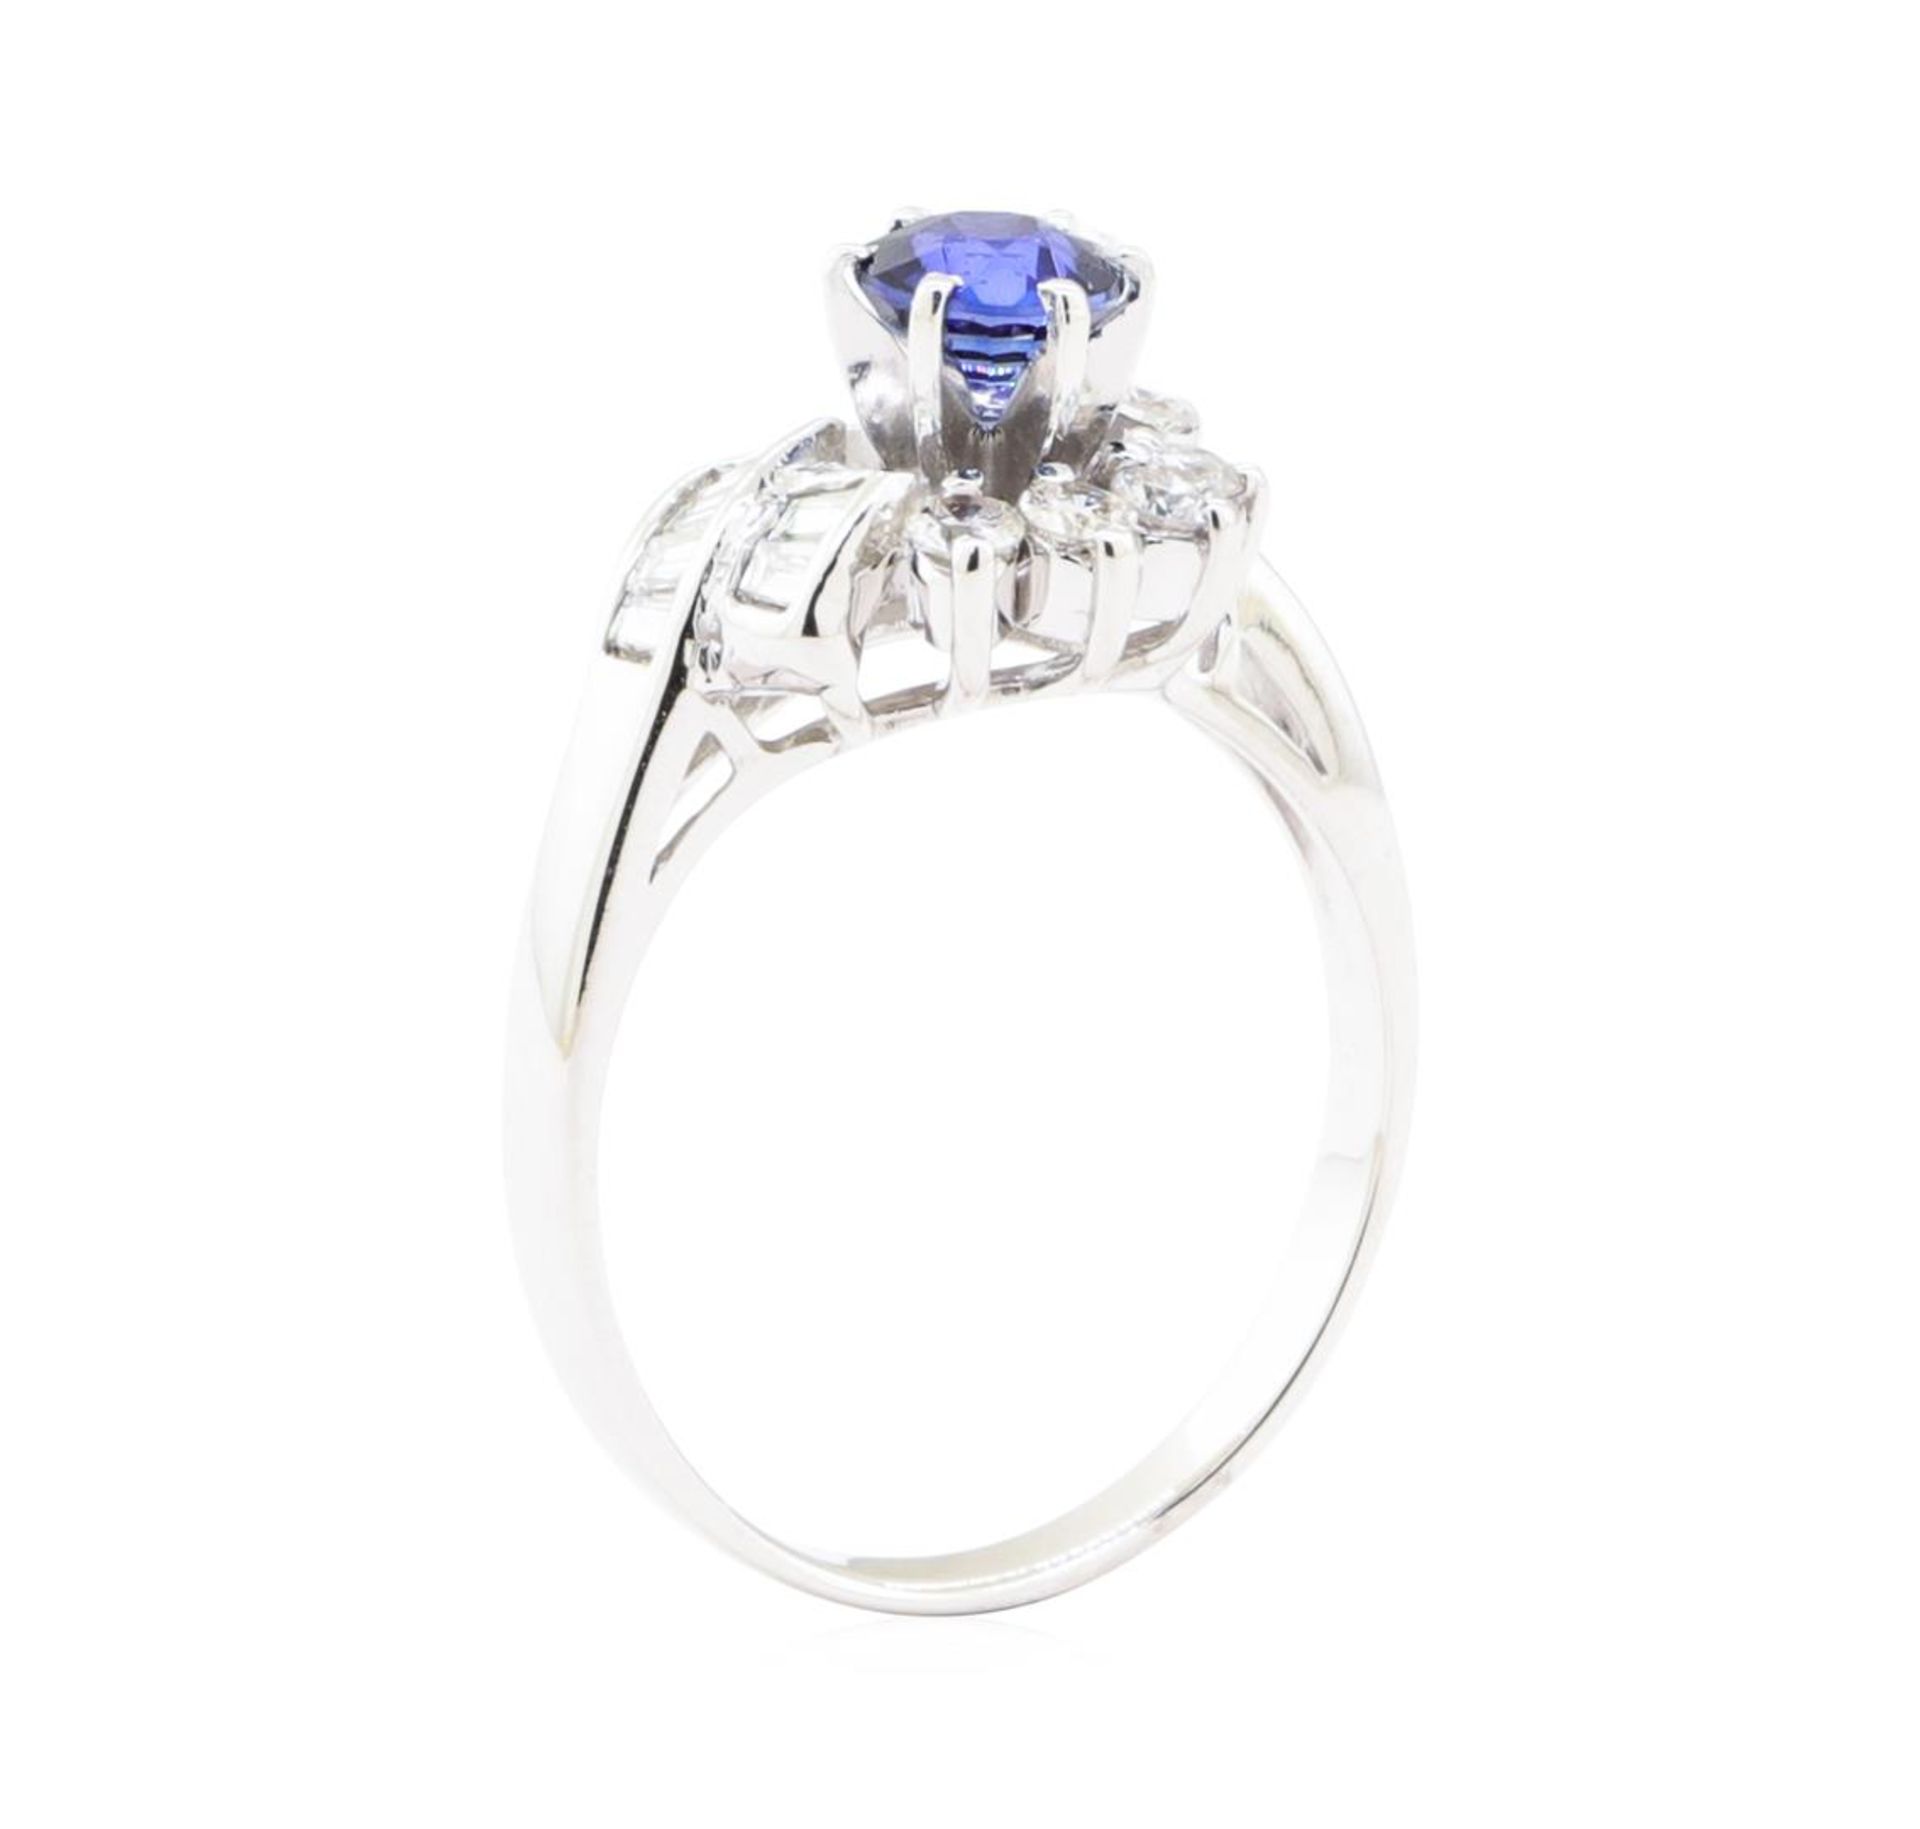 1.13 ctw Sapphire and Diamond Ring - 14KT White Gold - Image 4 of 4